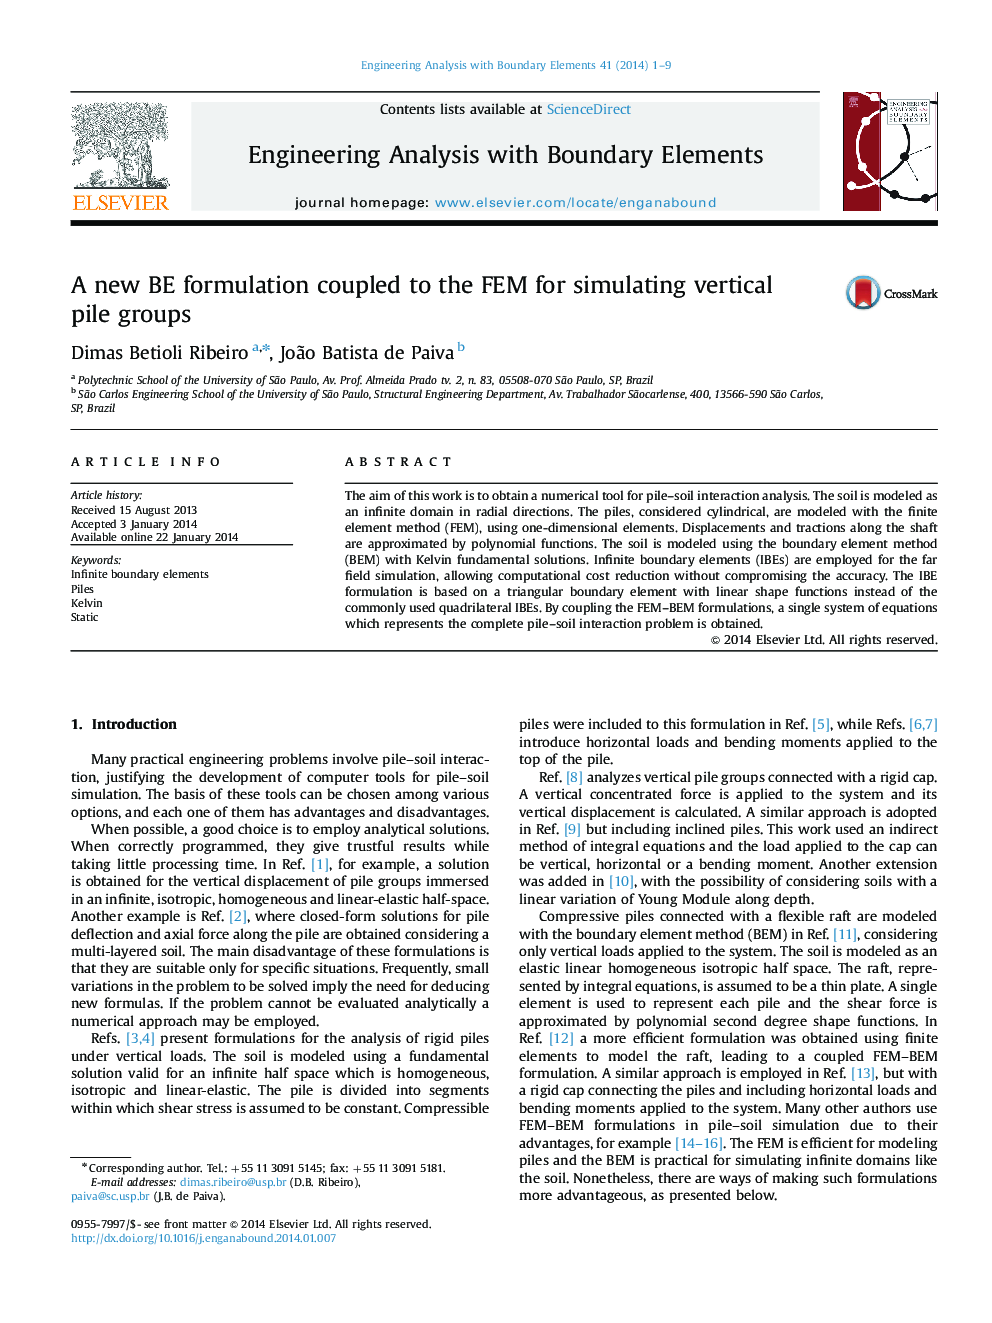 A new BE formulation coupled to the FEM for simulating vertical pile groups